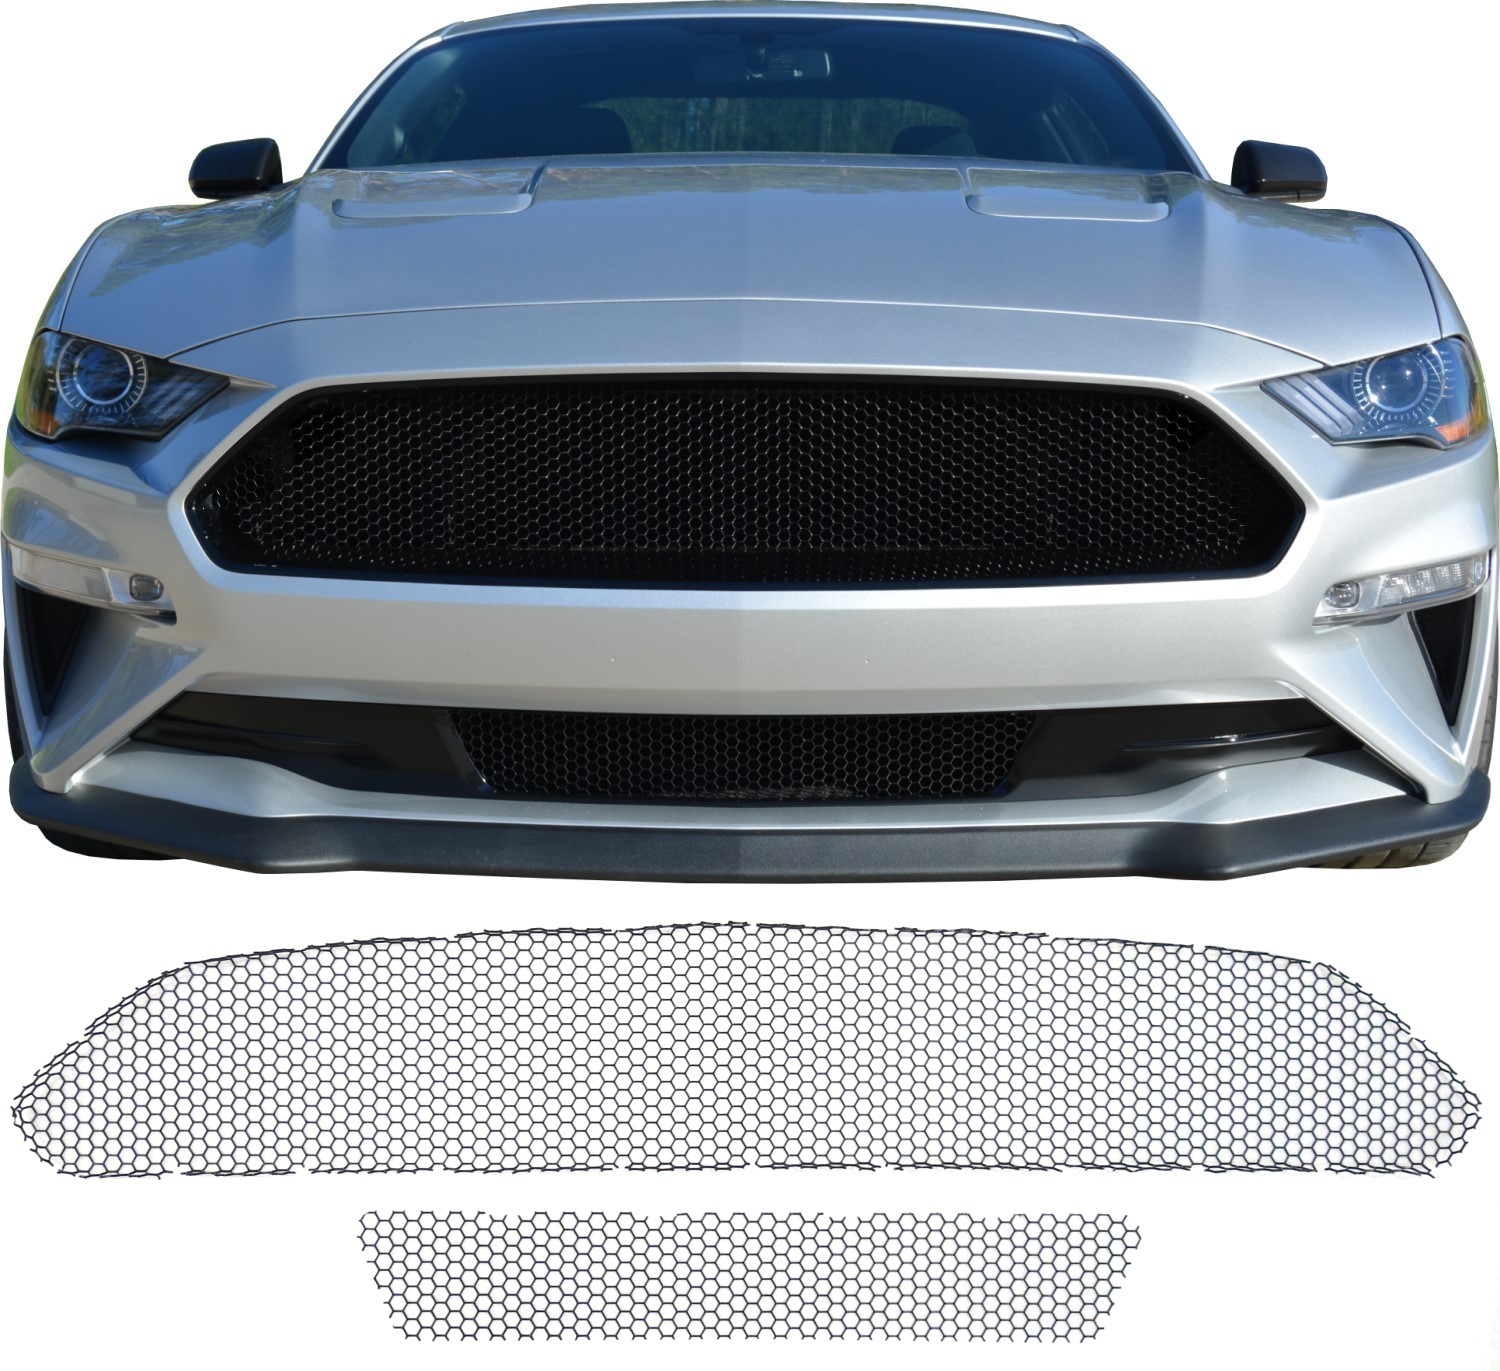 New Product Alert: Grille Mesh Kit for 2018+ Ford Mustang Ecoboost